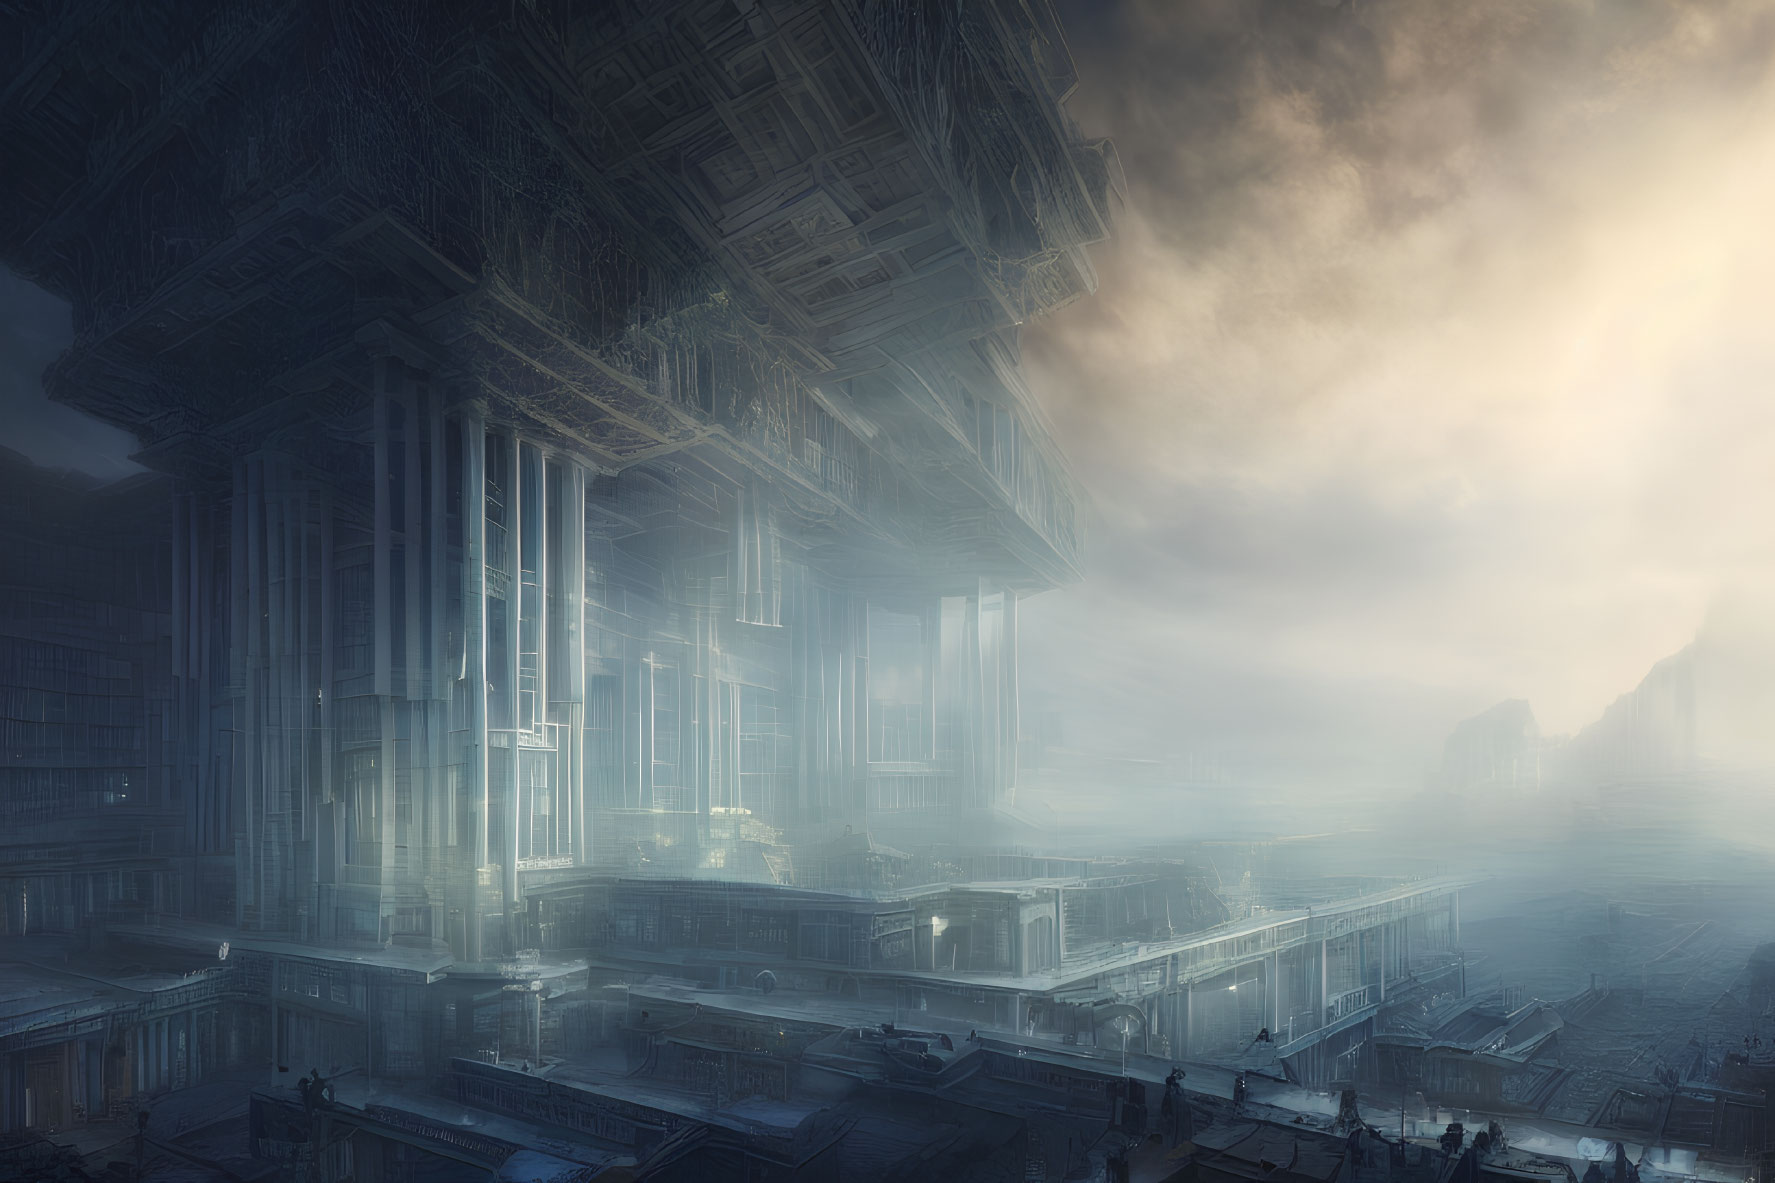 Futuristic cityscape with towering structures in misty light